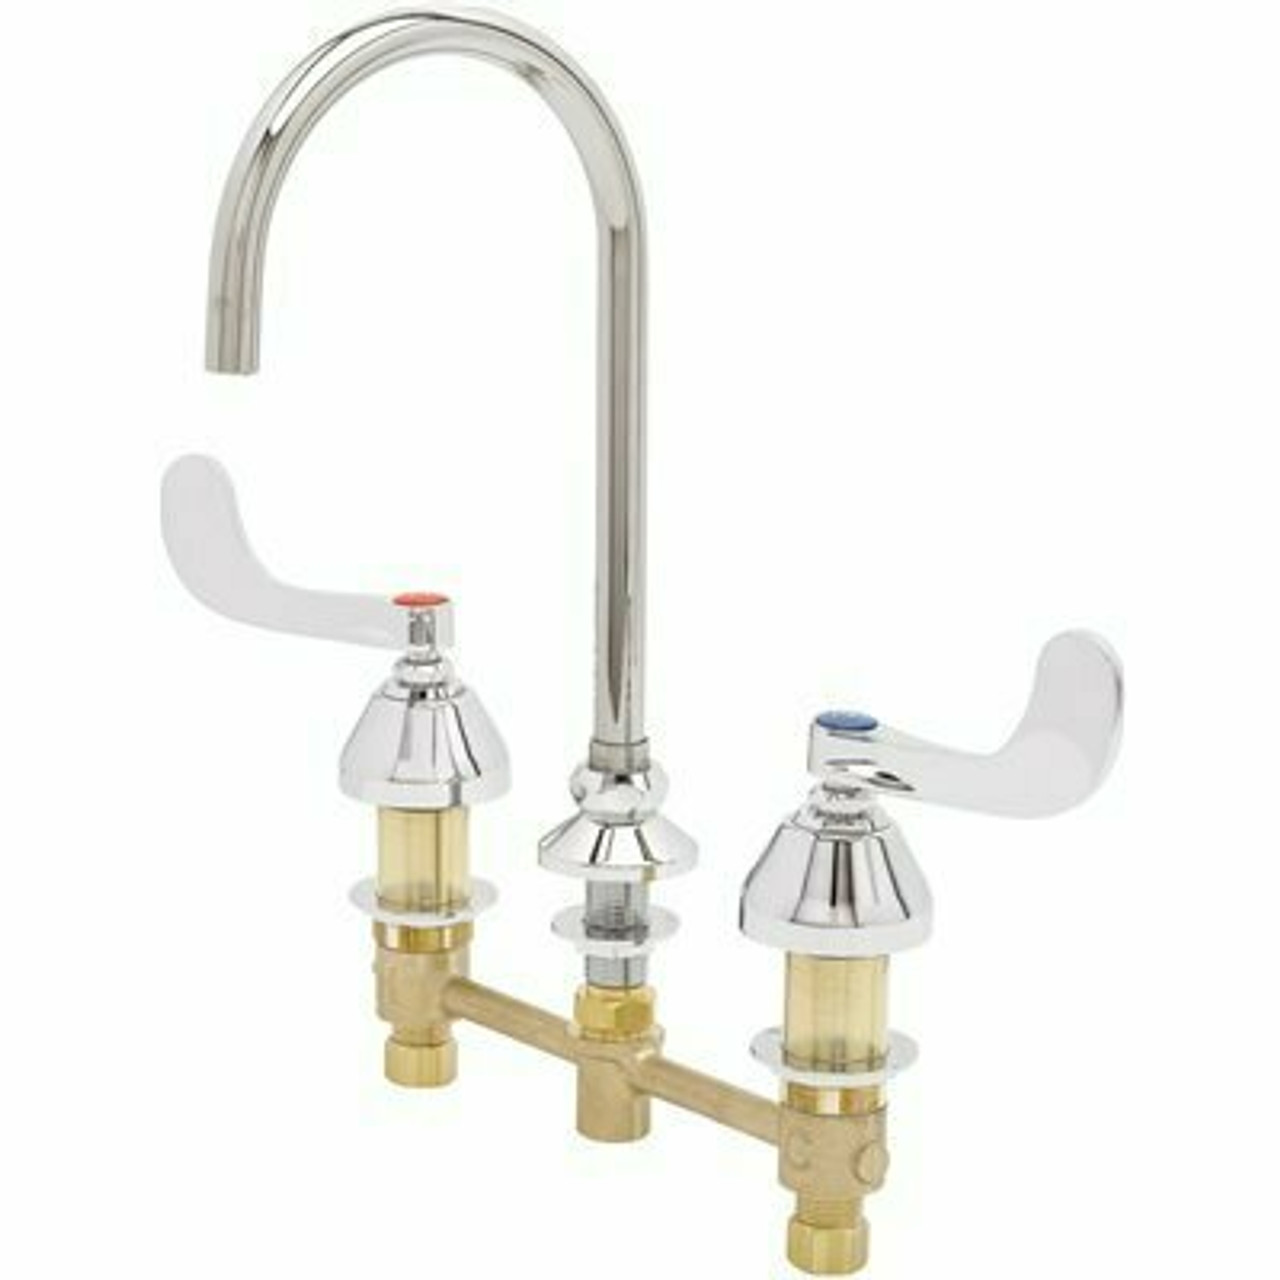 T&S 2-Handle Medical Faucet In Polished Chrome With Plain End Spout